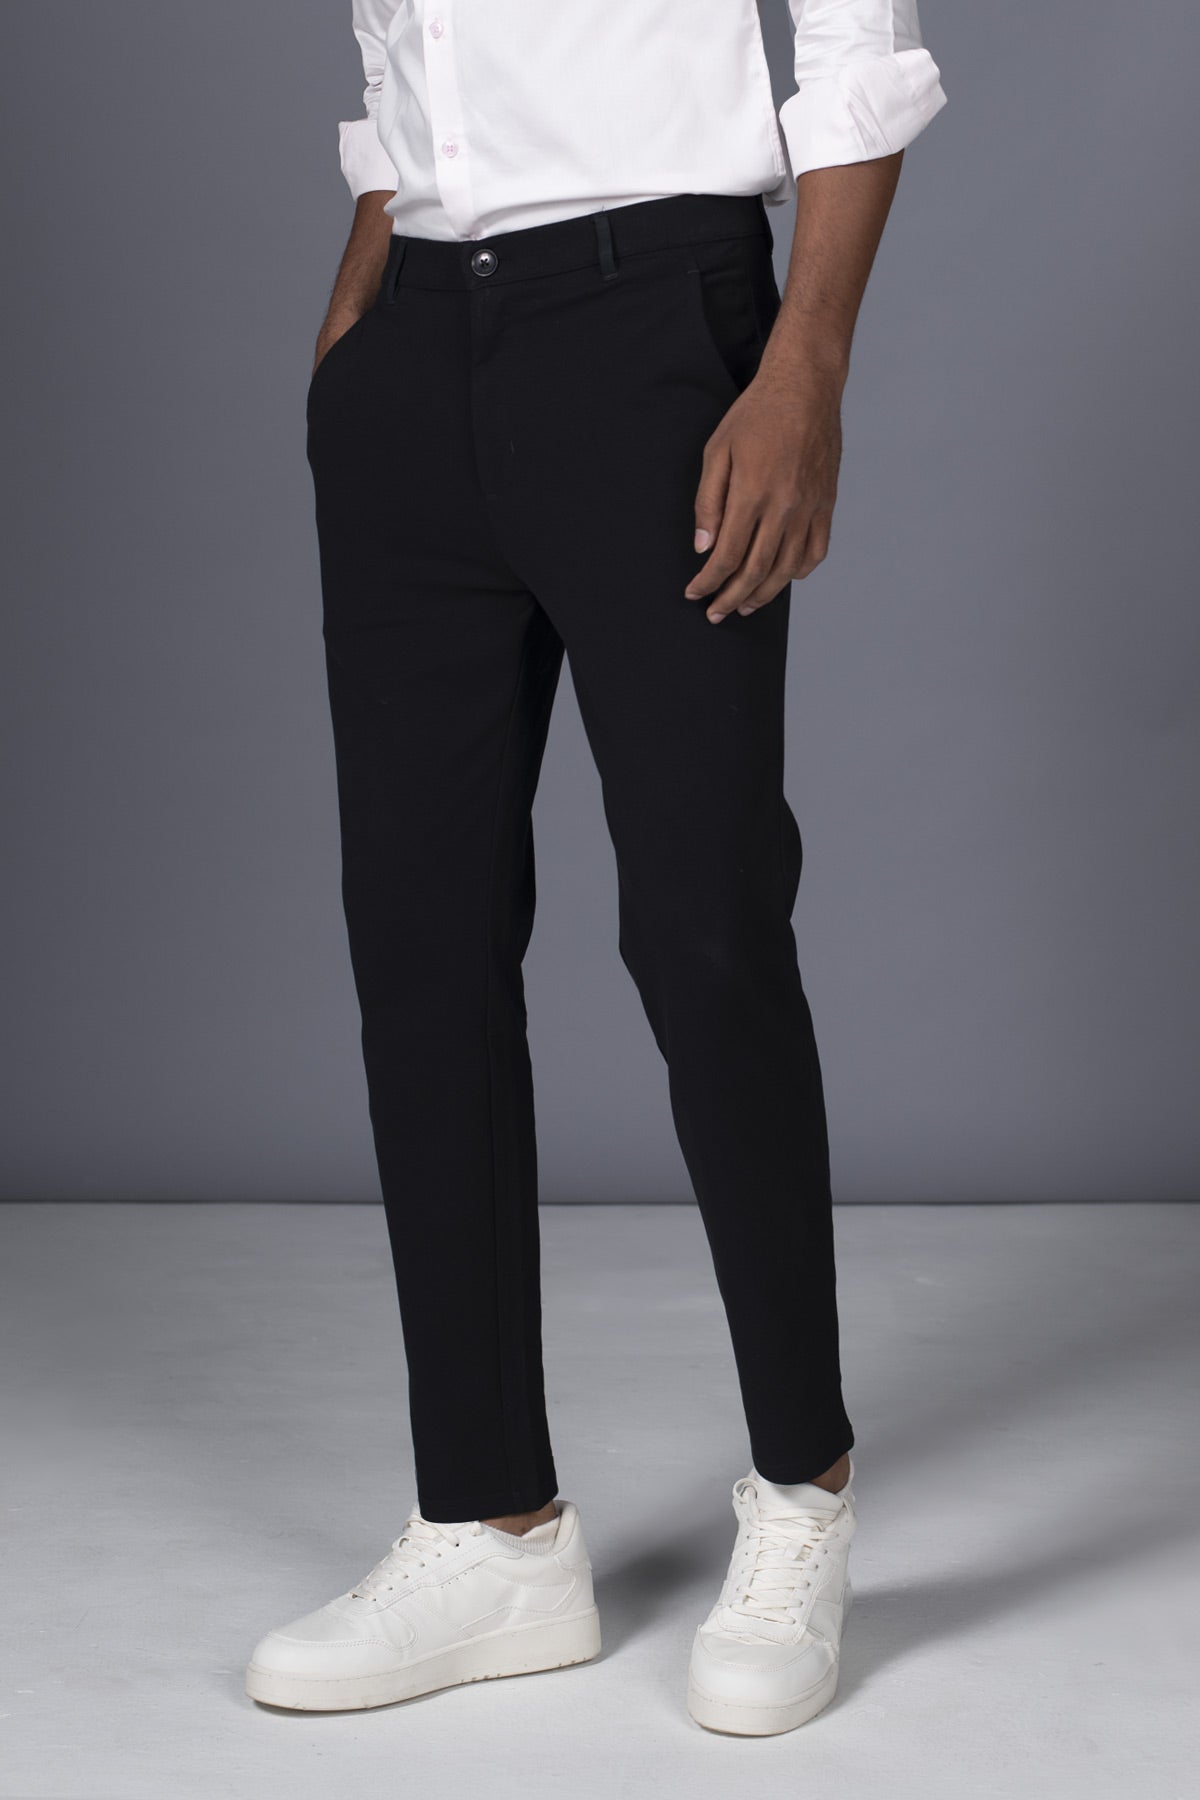 Buy The Black Pant | Beyours